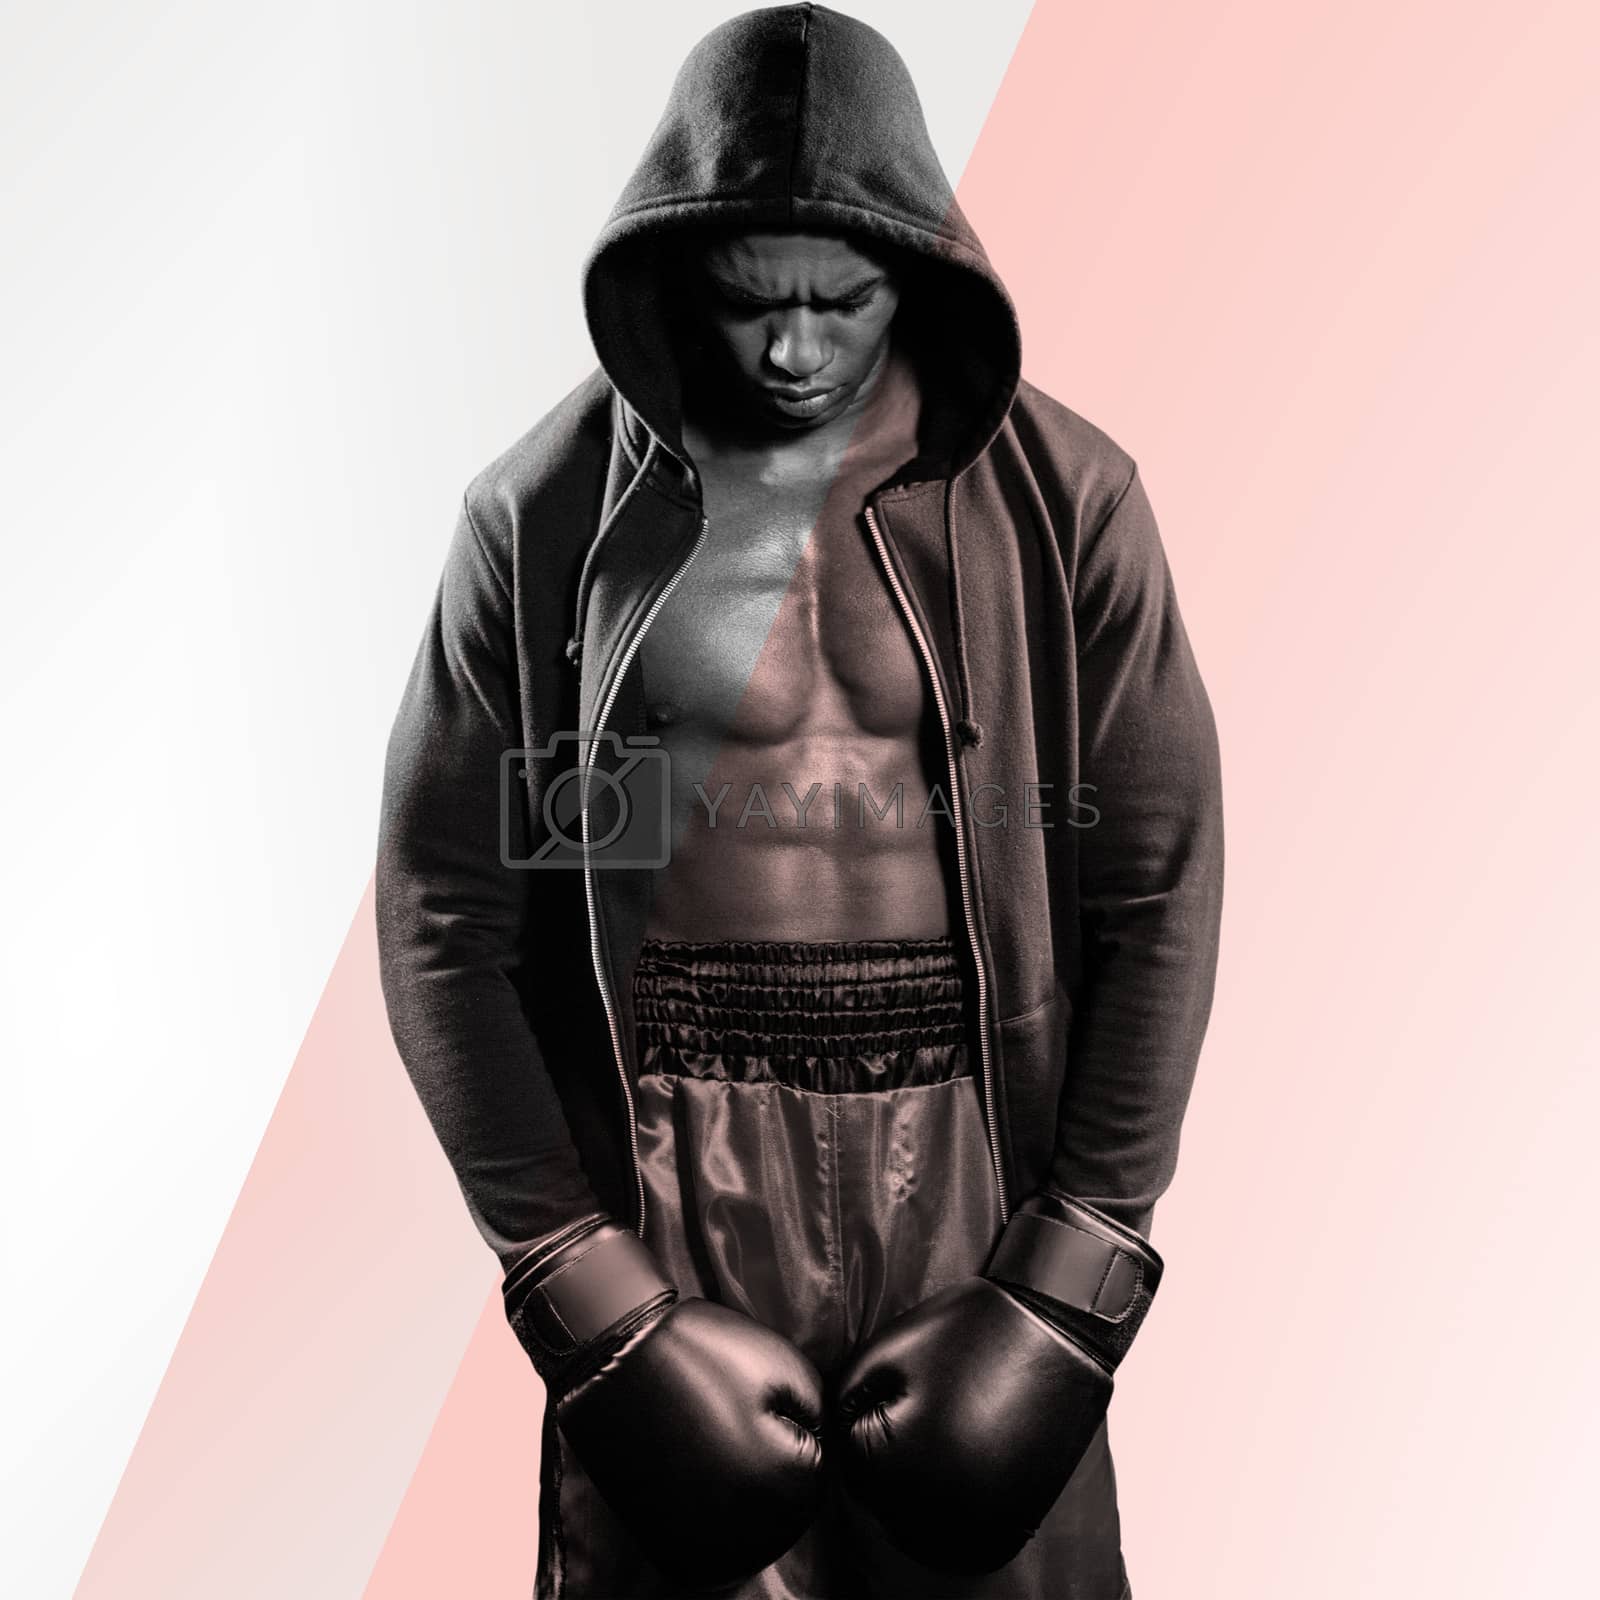 Royalty free image of Composite image of boxer posing after failure by Wavebreakmedia